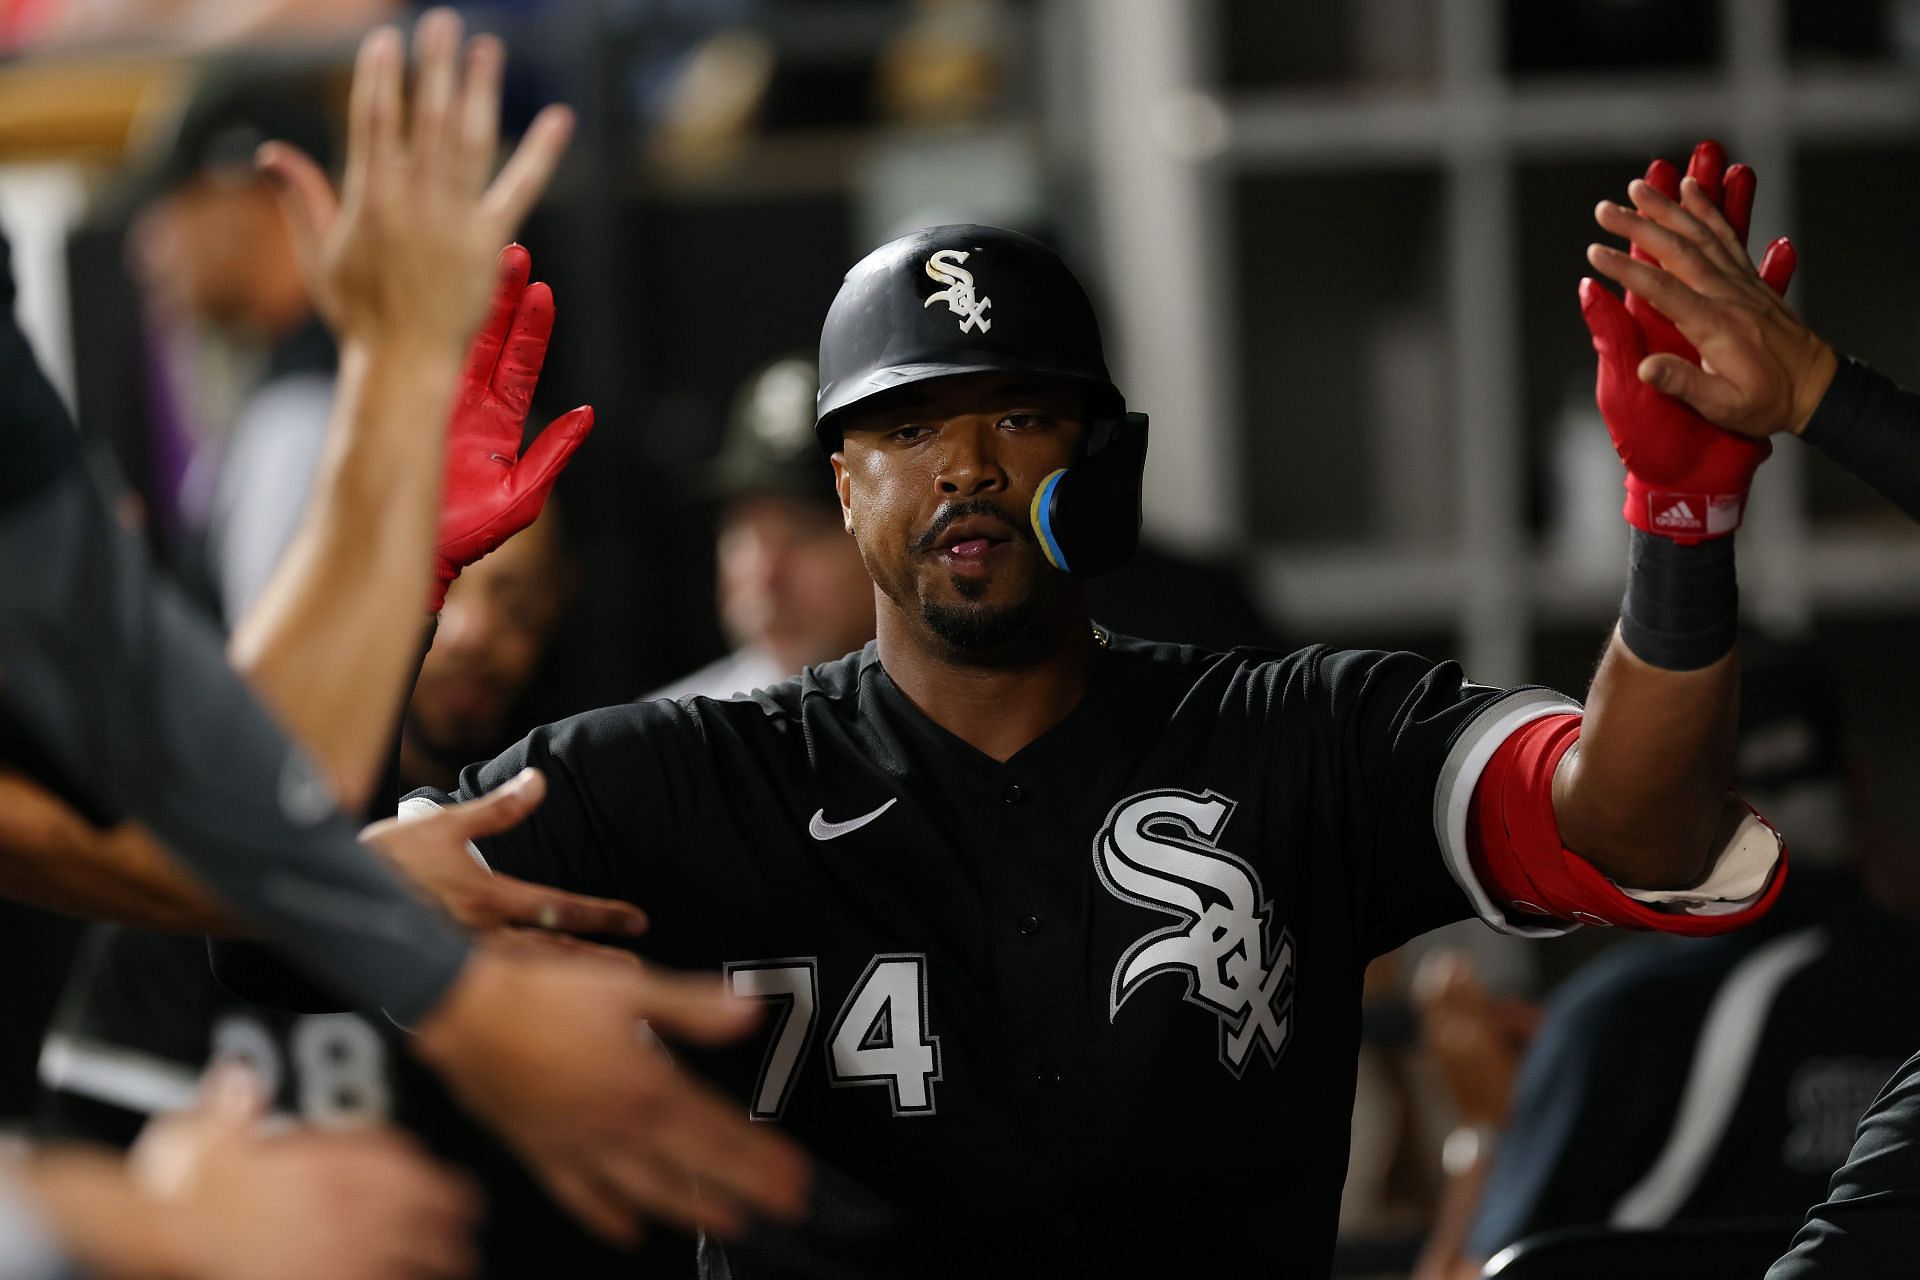 Eloy Jimenez of the Chicago White Sox celebrates after hitting a solo home run.